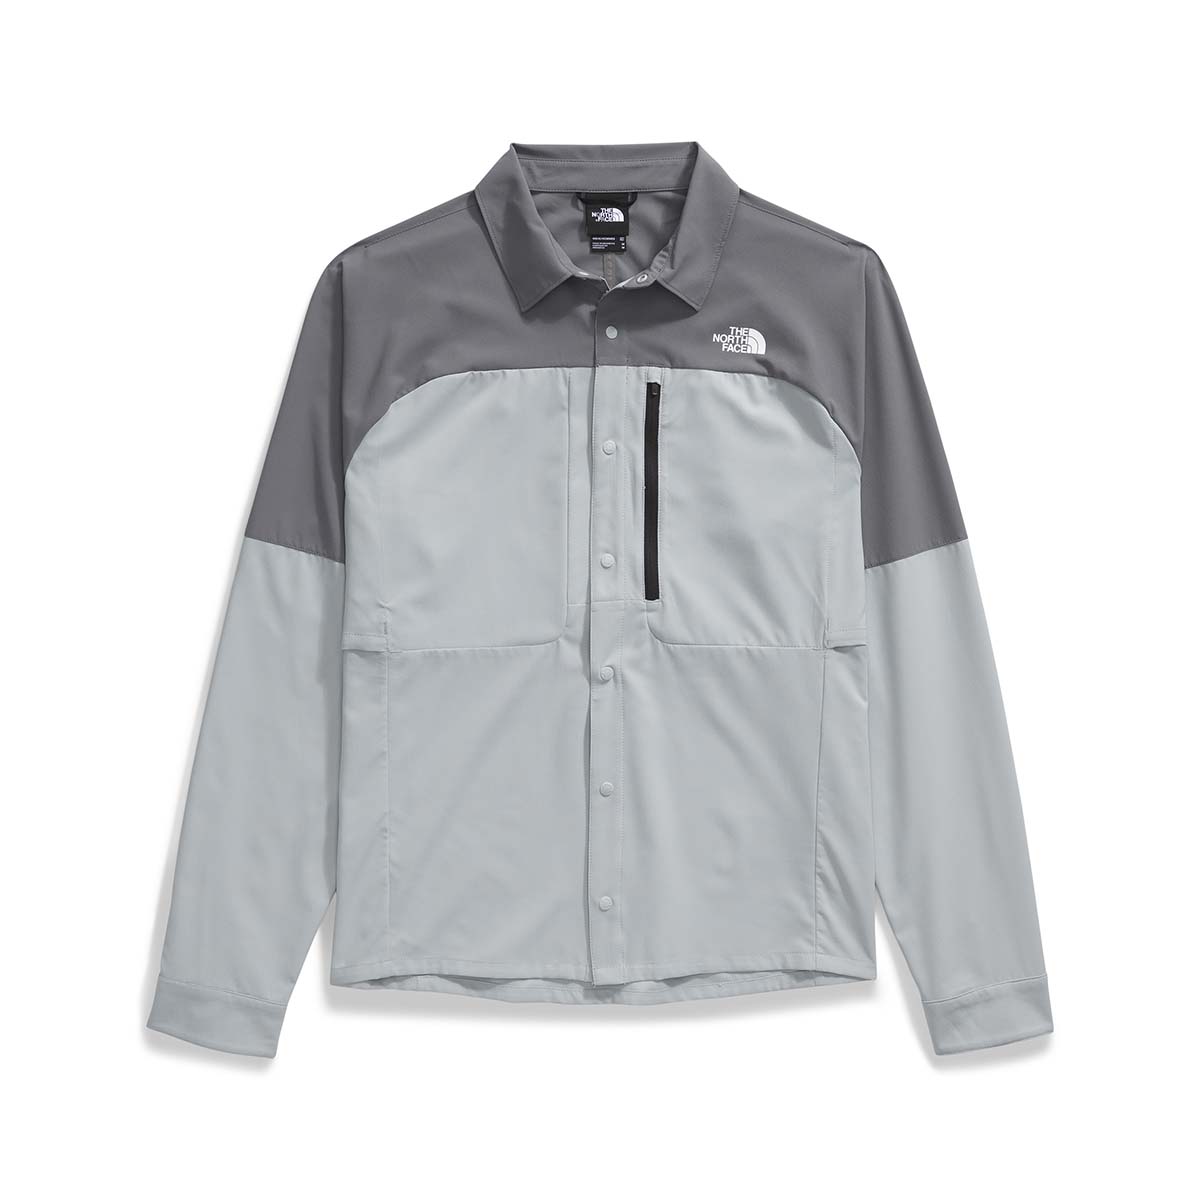 The North Face Men's First Trail UPF Long-Sleeve Shirt